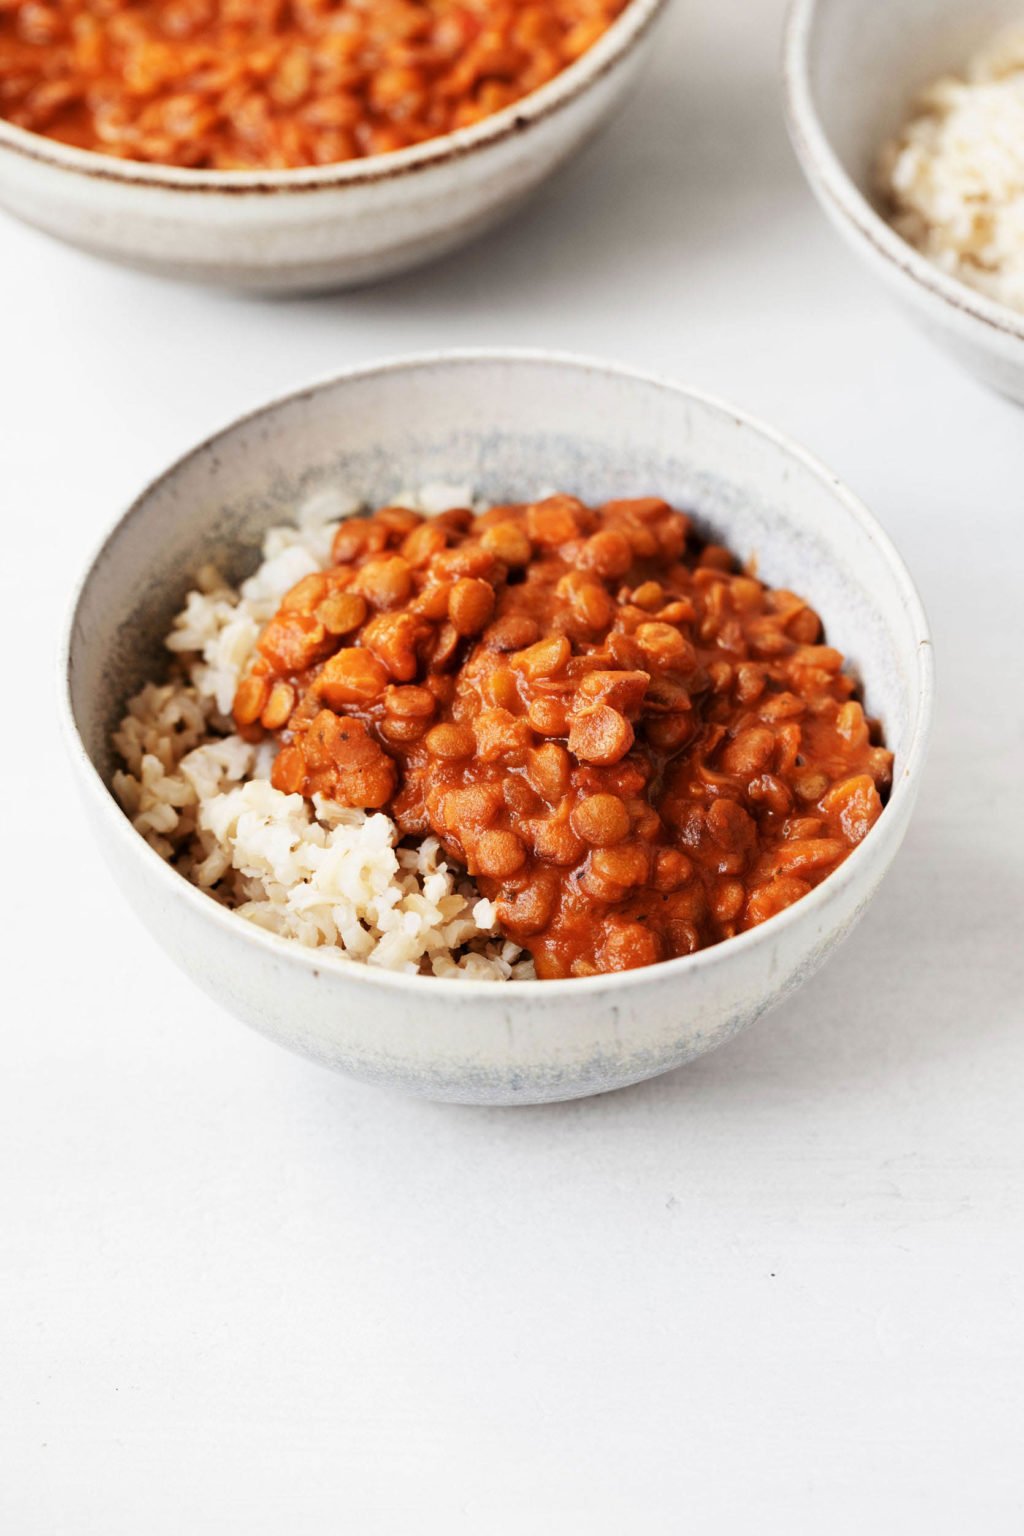 Two white, ceramic bowls hold dishes of masala spiced lentils and cooked brown rice.